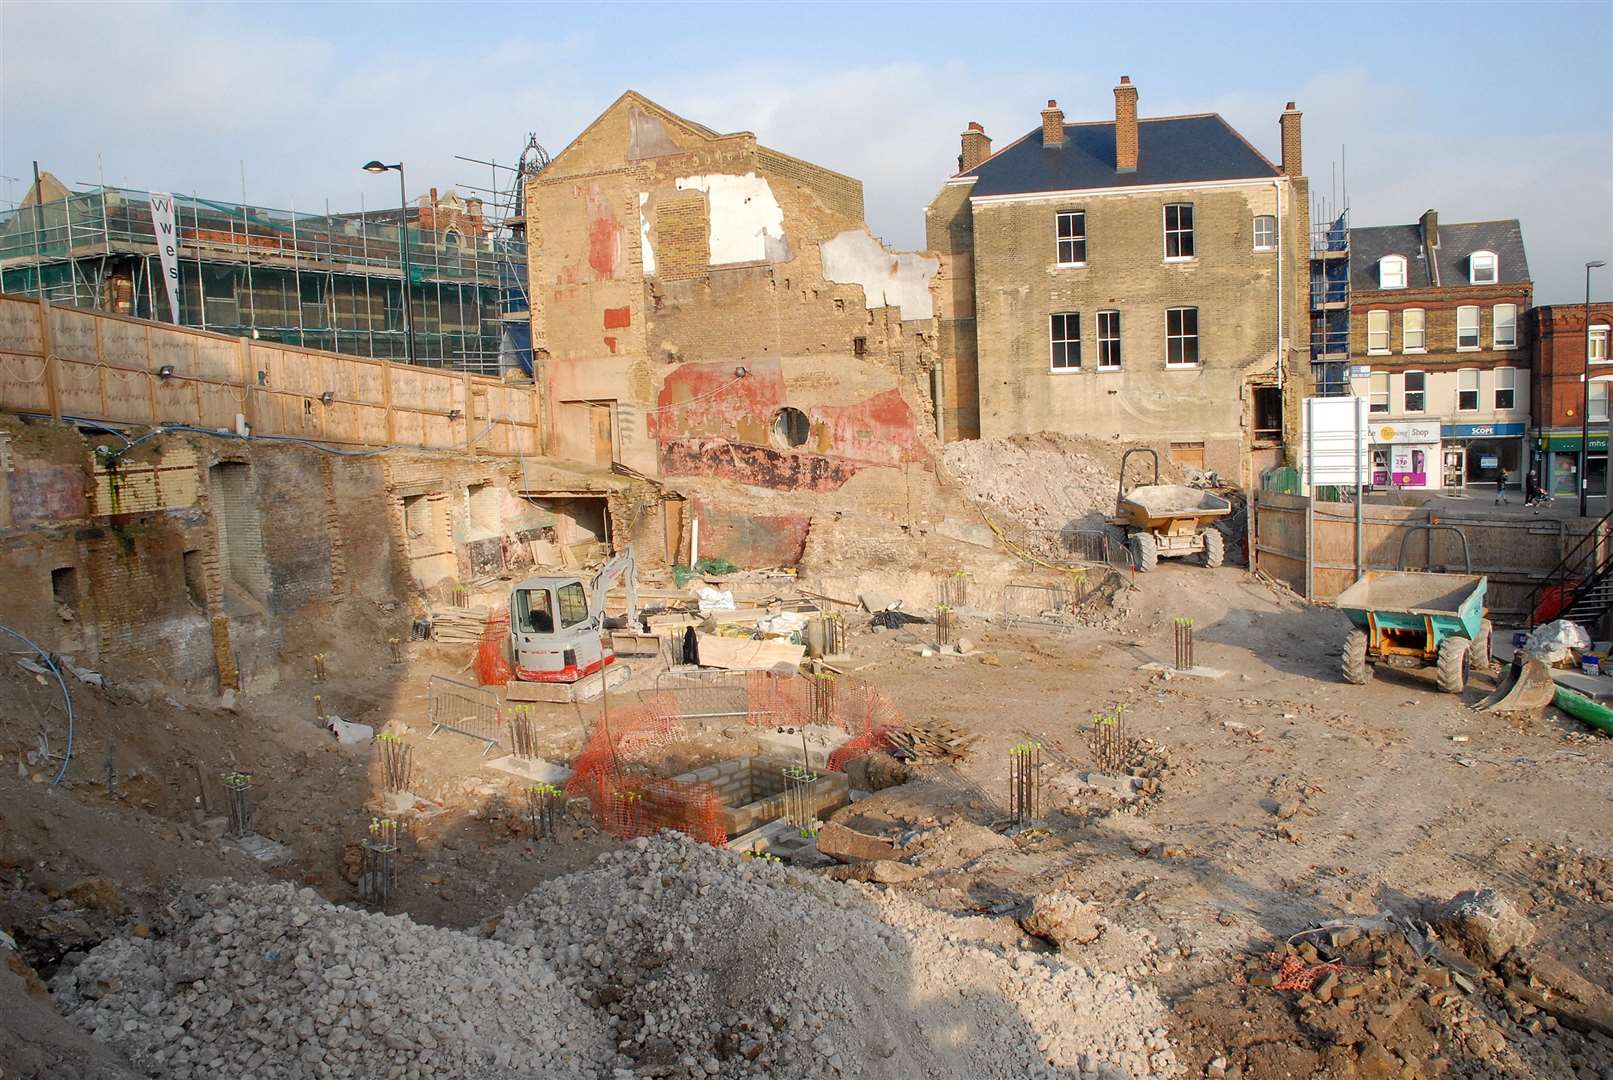 The site of the former auditorium cleared to make way for new flats